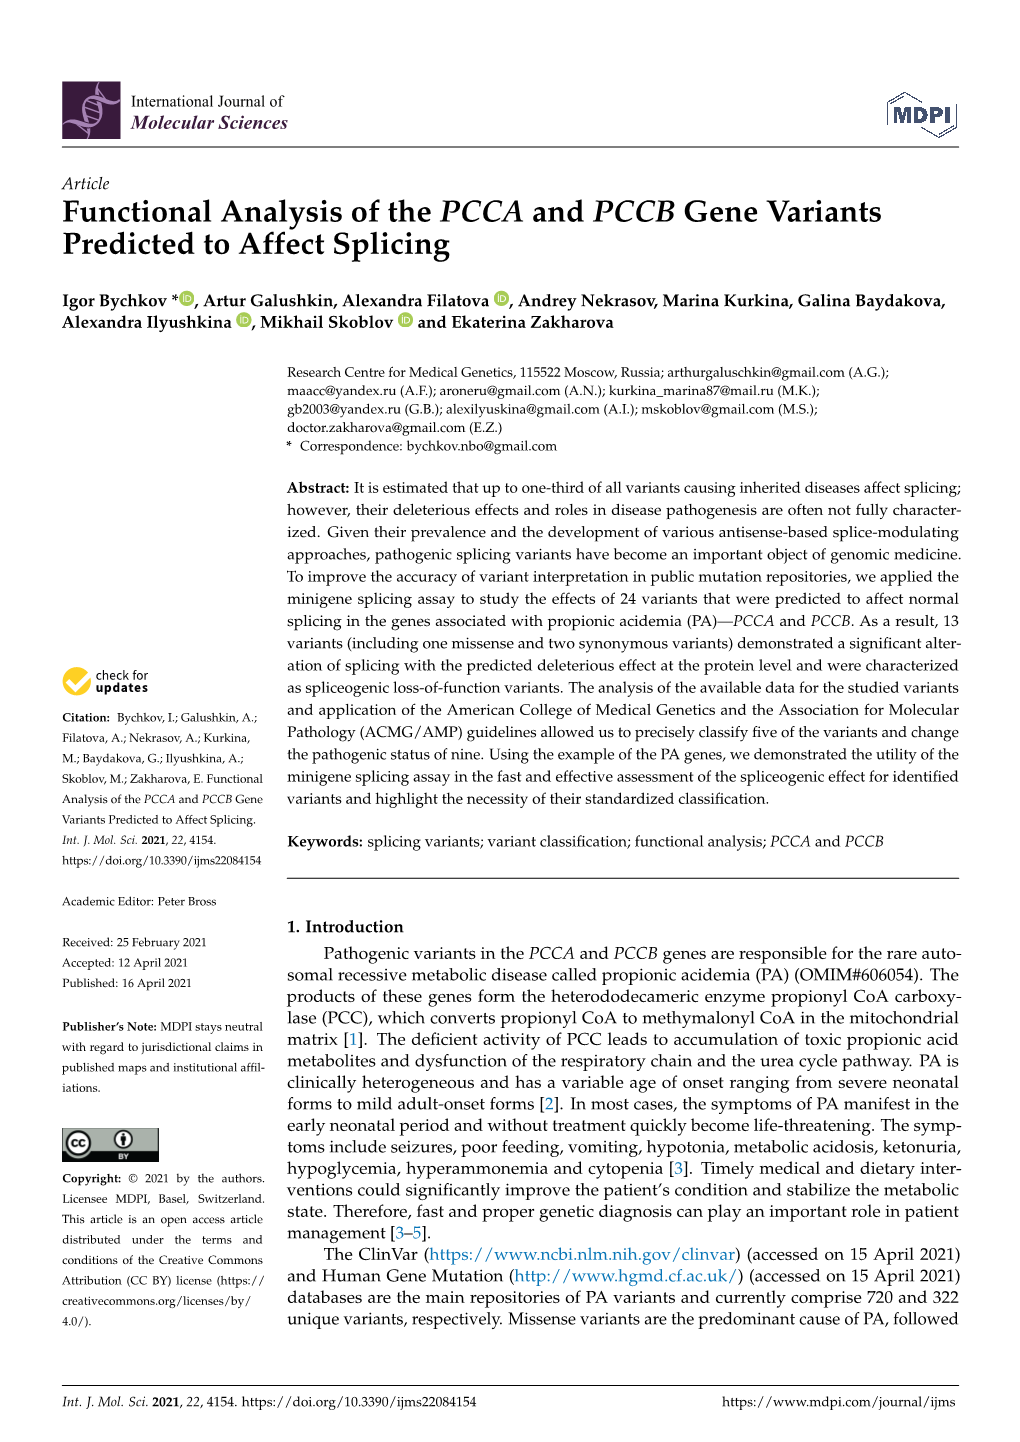 Functional Analysis of the PCCA and PCCB Gene Variants Predicted to Affect Splicing